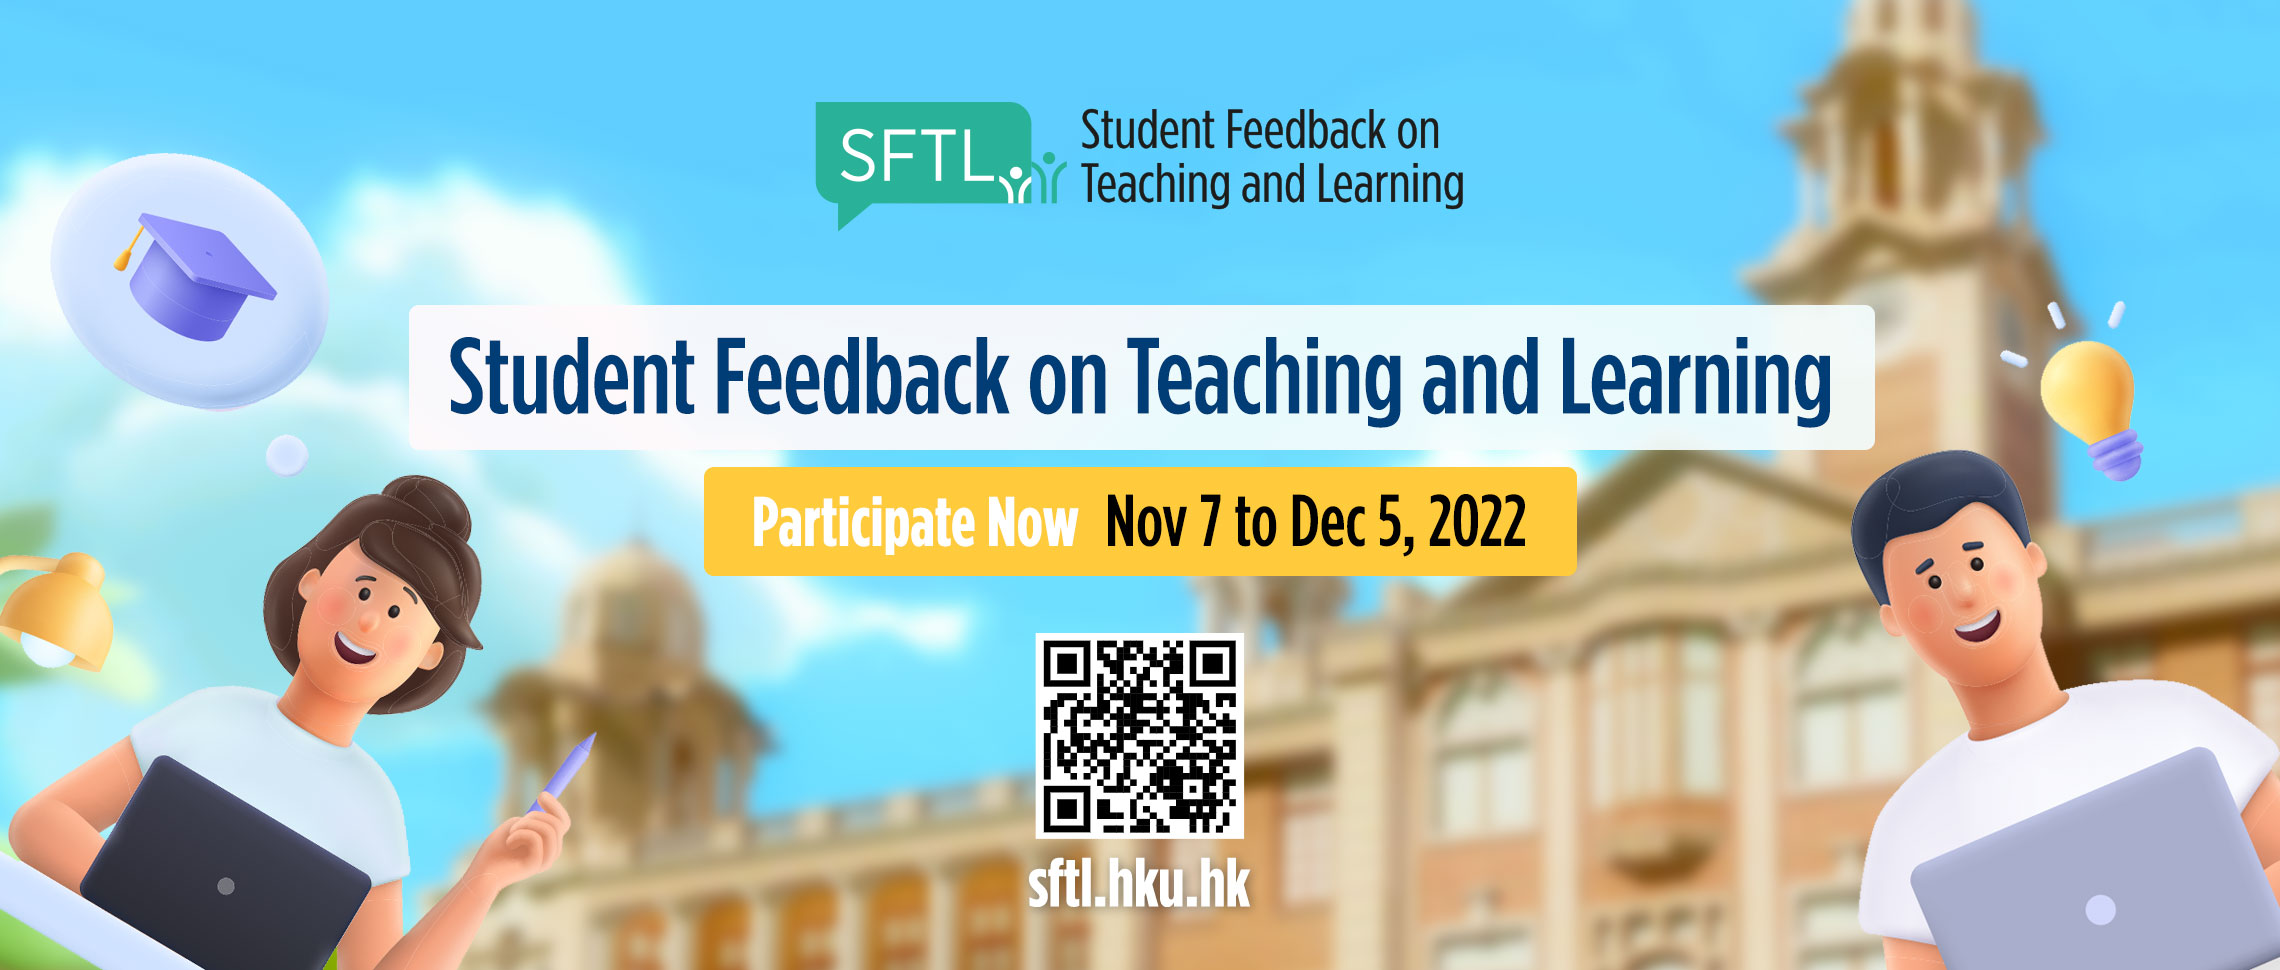 Student Feedback on Teaching and Learning (SFTL) in 2022-23 Semester 1